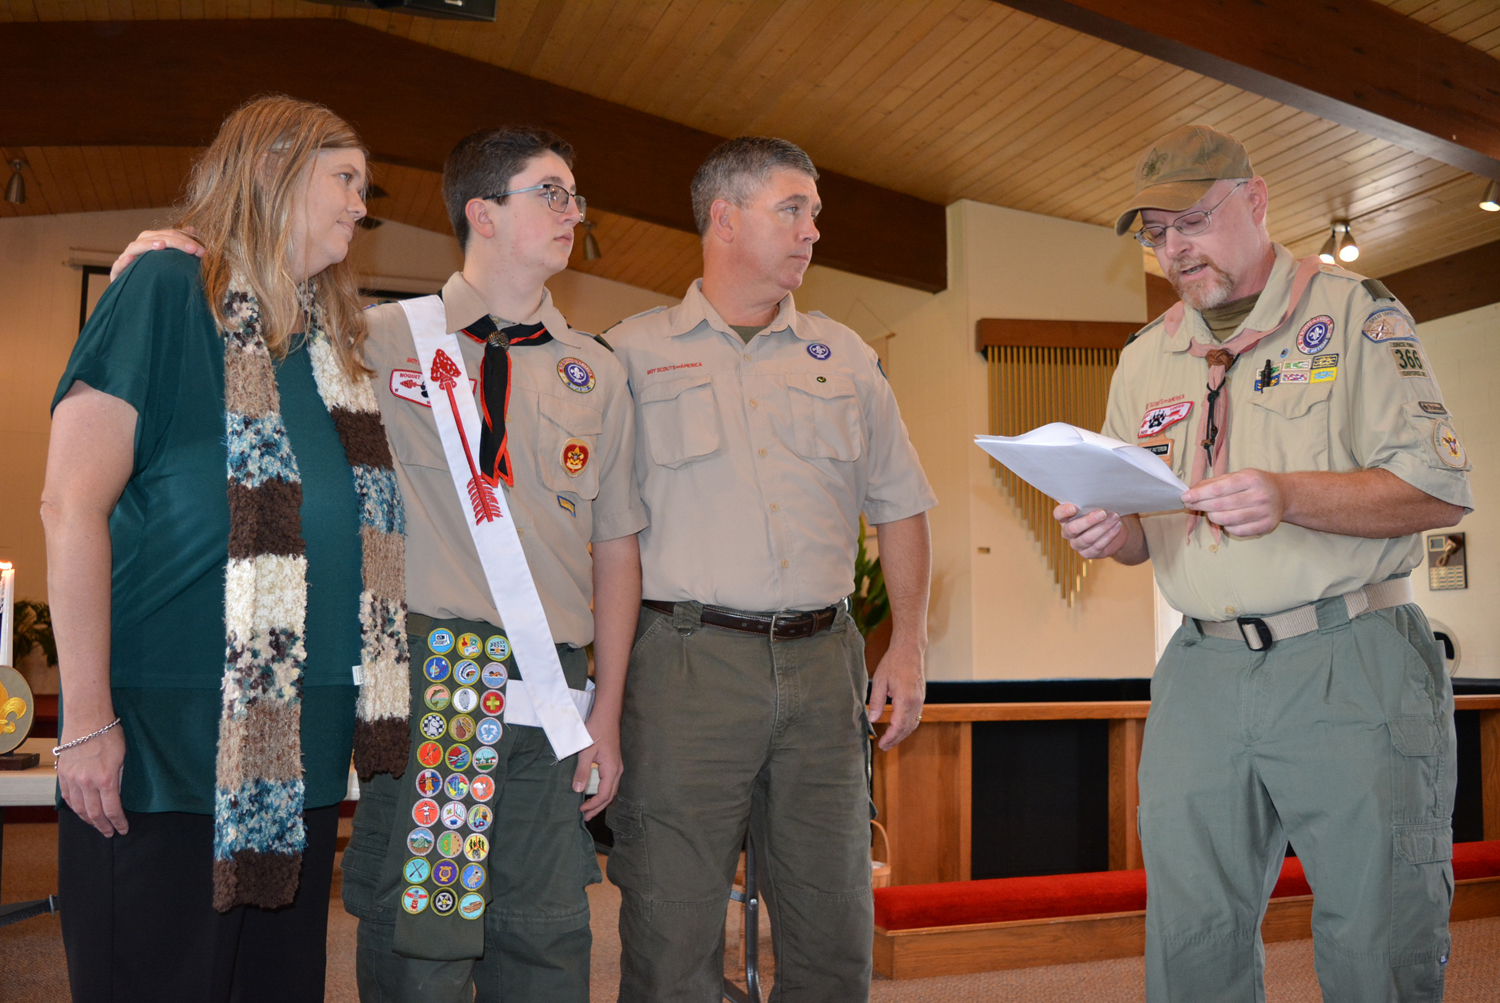 The Patterson family – (from left) Donica, Sean and Scott – listen to Assistant Scoutmaster Steve Patterson (no relation) deliver the Eagle Charge during the Court of Honor ceremony held Saturday afternoon at Oxford United Methodist Church. Photos by C.J. Carnacchio.